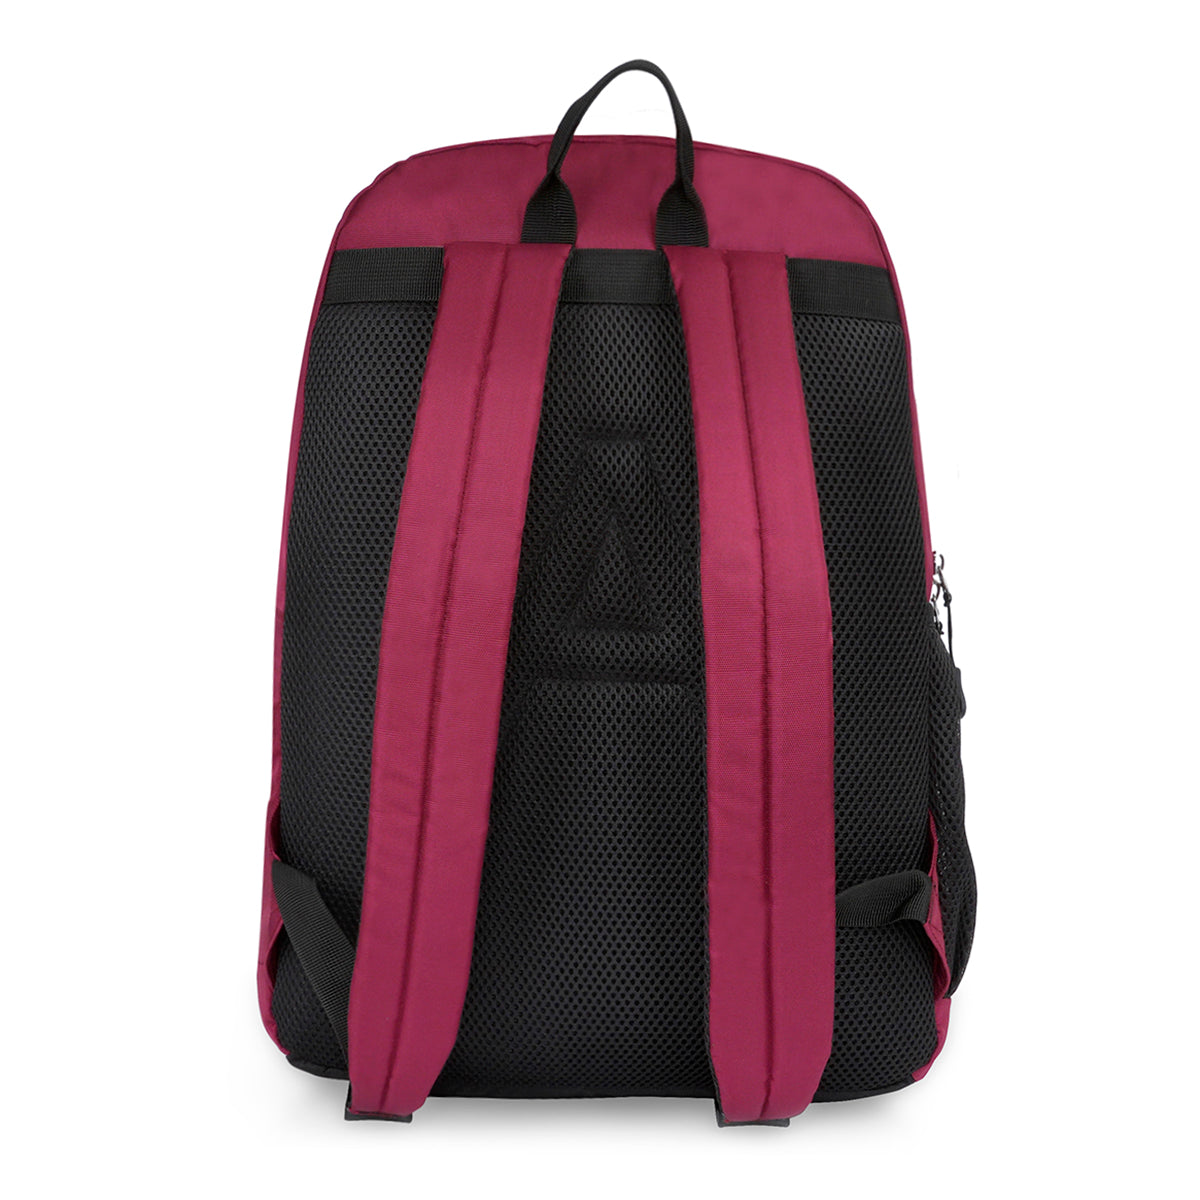 Aeropostale Coppell Non Laptop Backpack burgundy